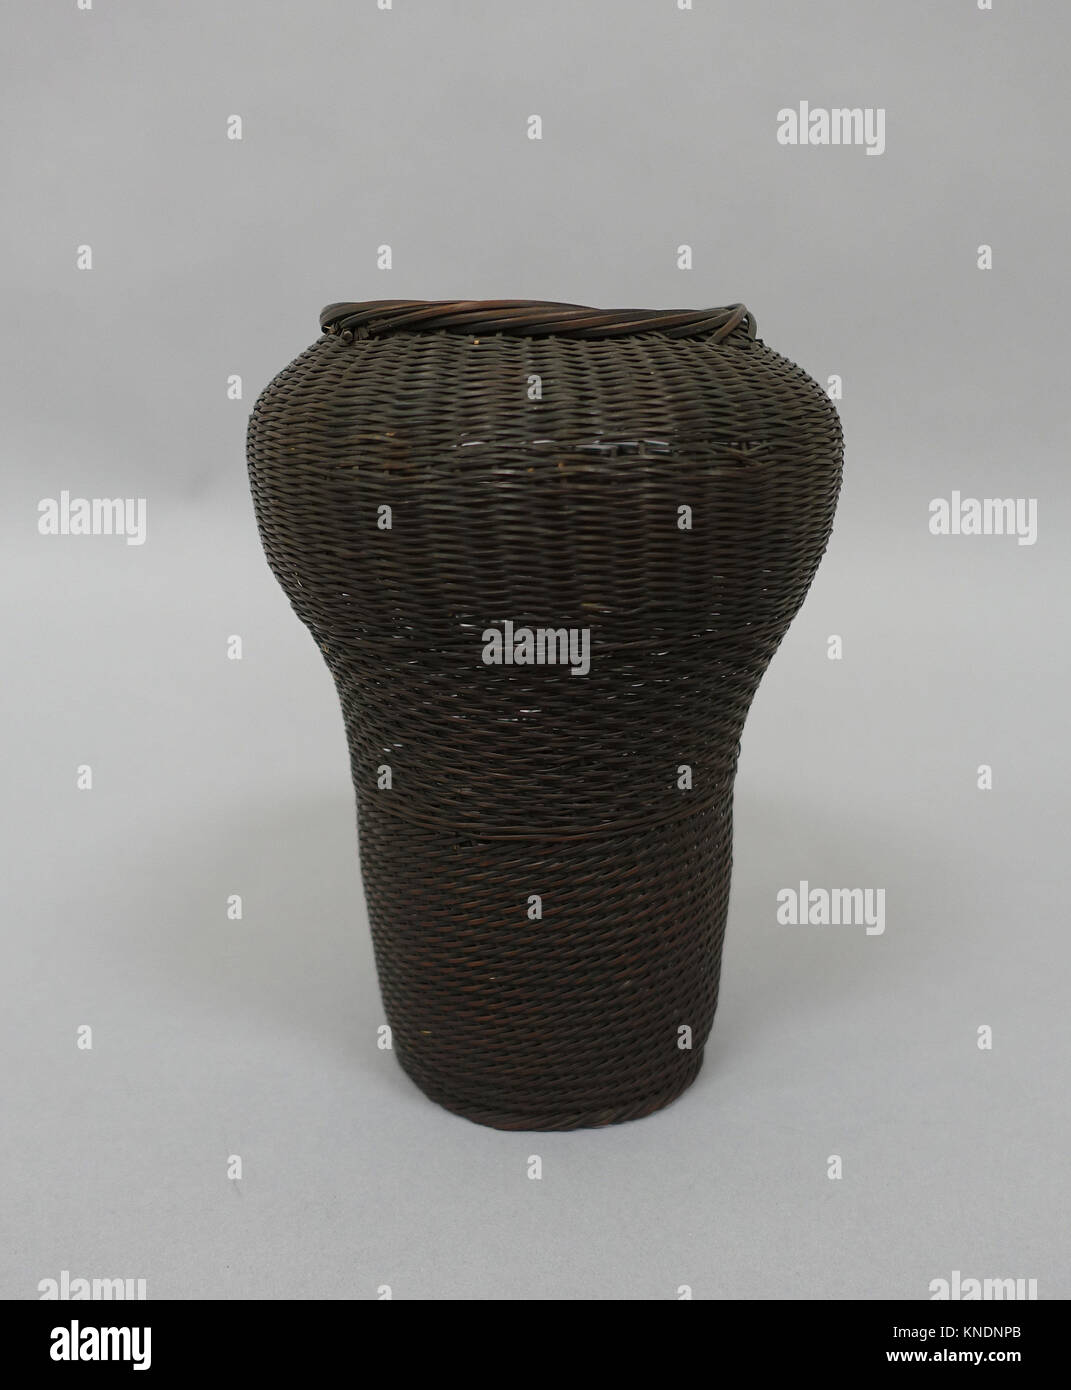 Basket. Date: 19th century; Culture: Japan; Medium: Rattan or bamboo; Dimensions: H. 8 in. (20.3 cm); Classification: Basketry Stock Photo